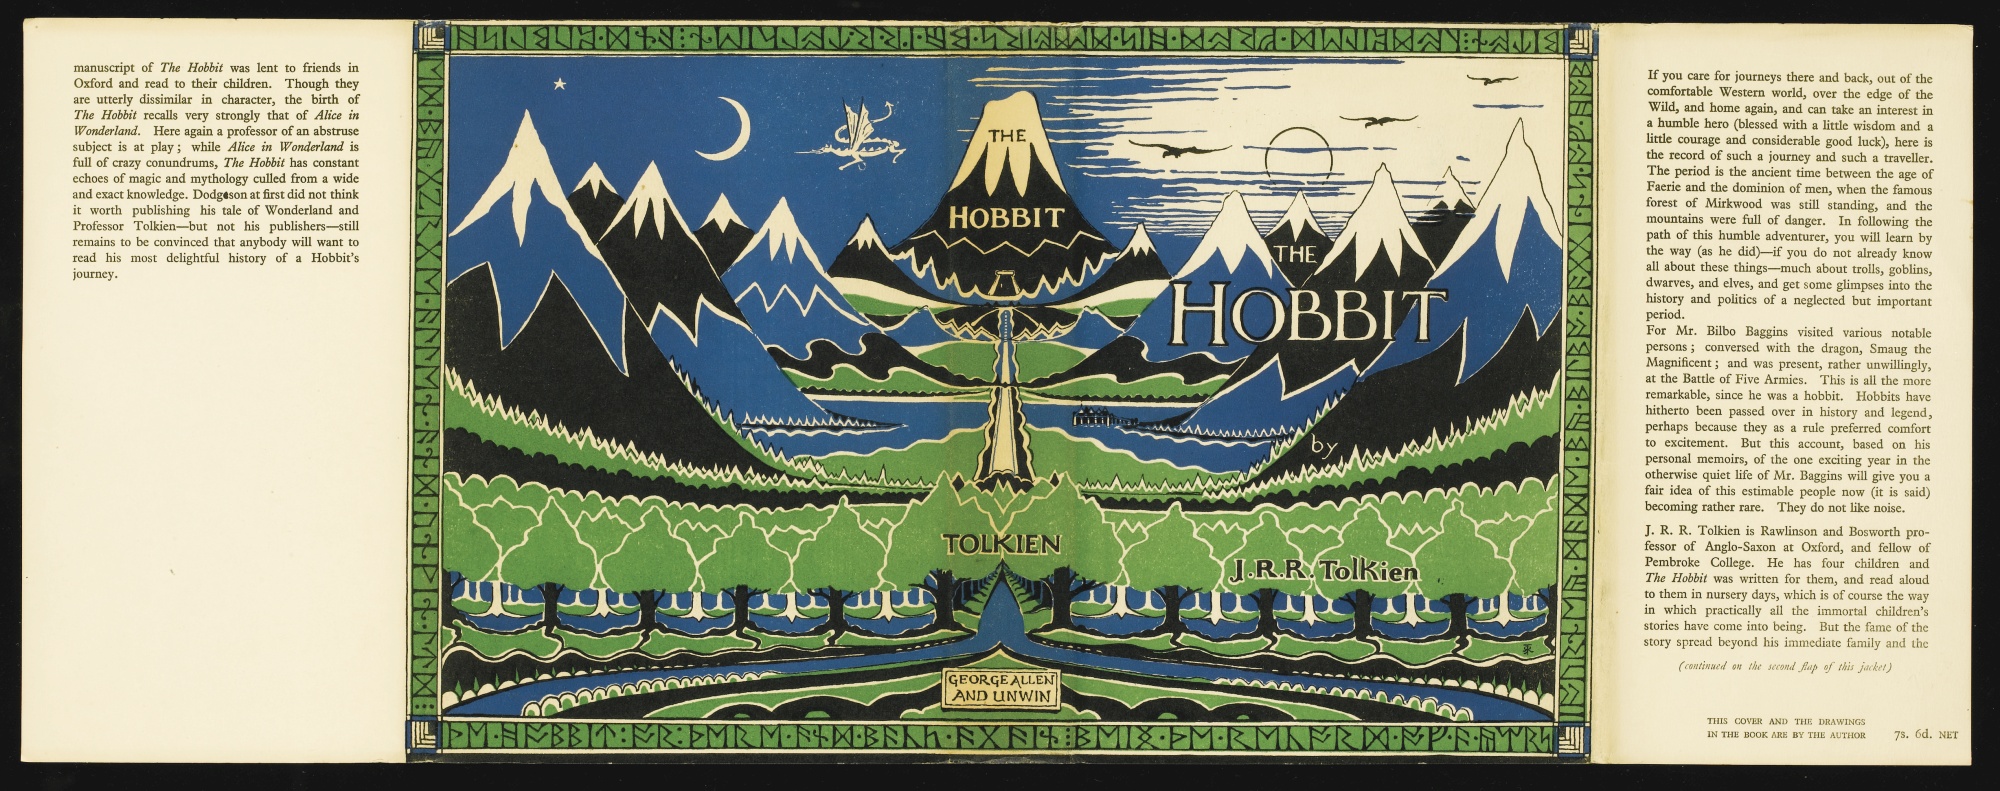 First Edition The Hobbit dustjacket in pristine condition